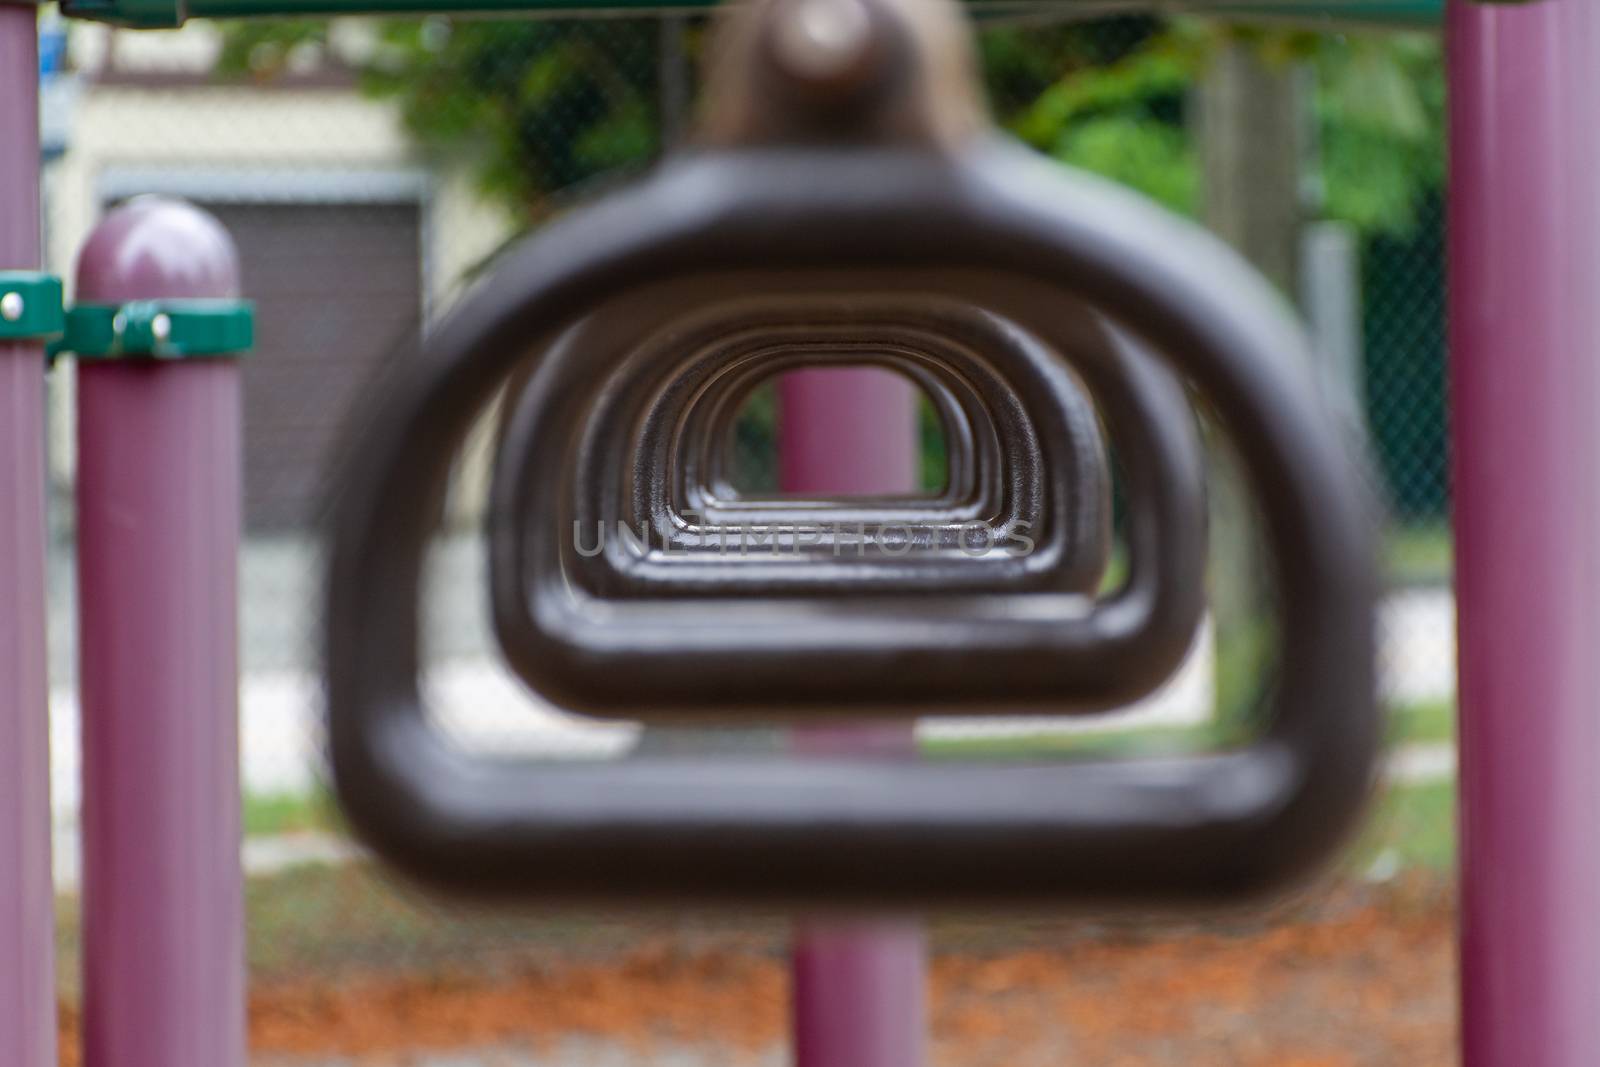 Empty monkey bars at a playground conecept looking through rings by kingmaphotos